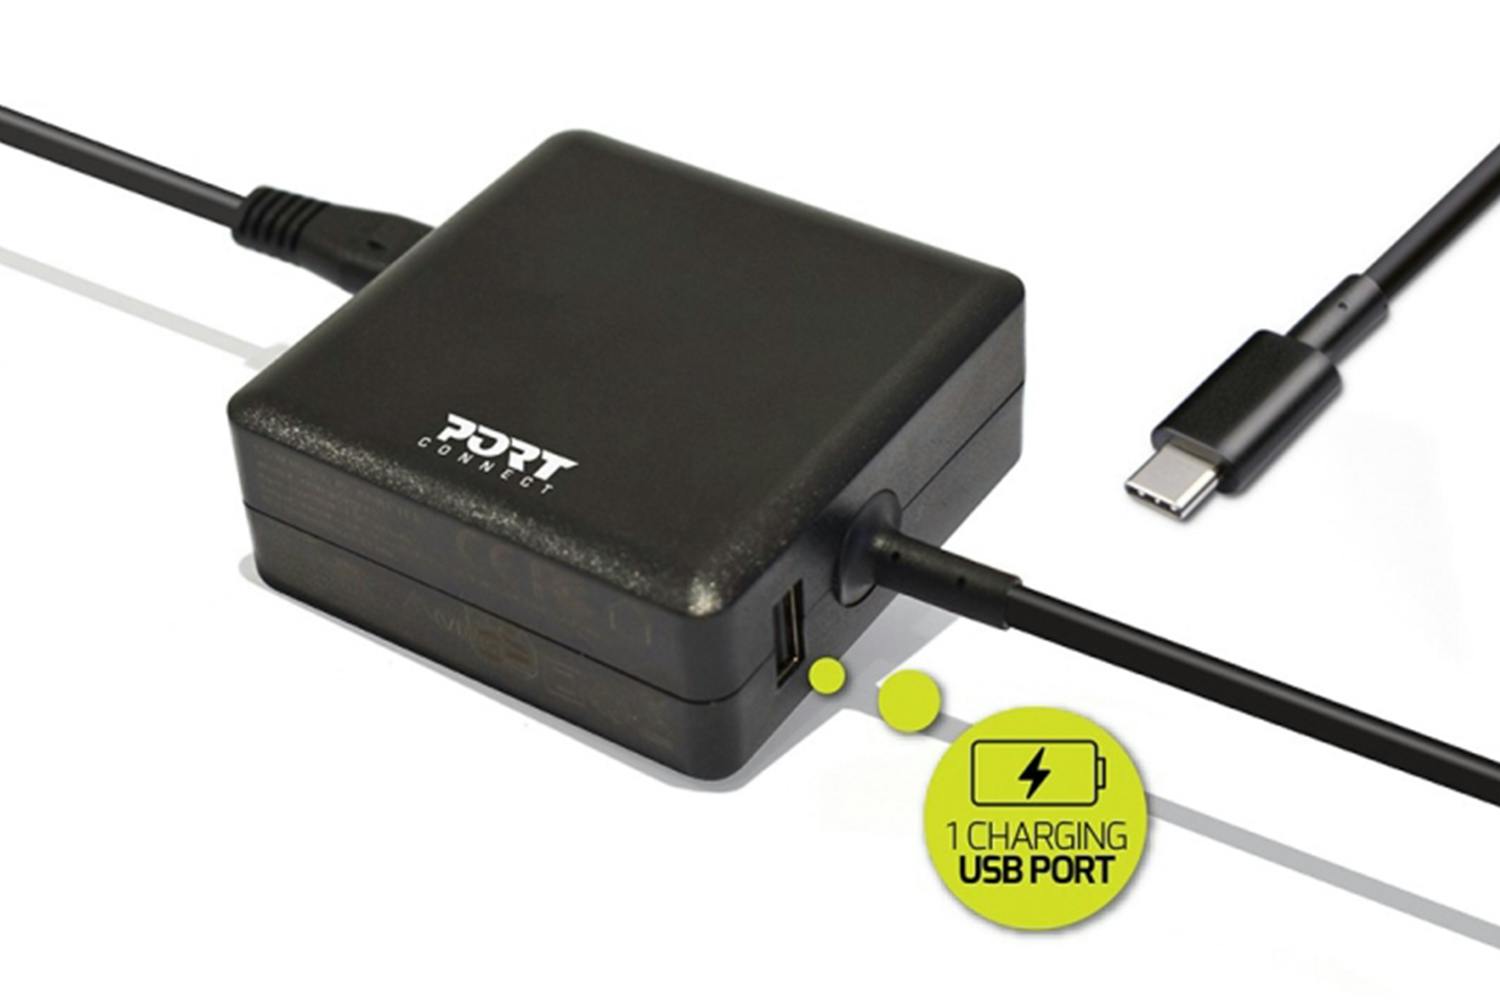 Port Designs 65W Type-C Laptop Power Supply with Charging USB Port